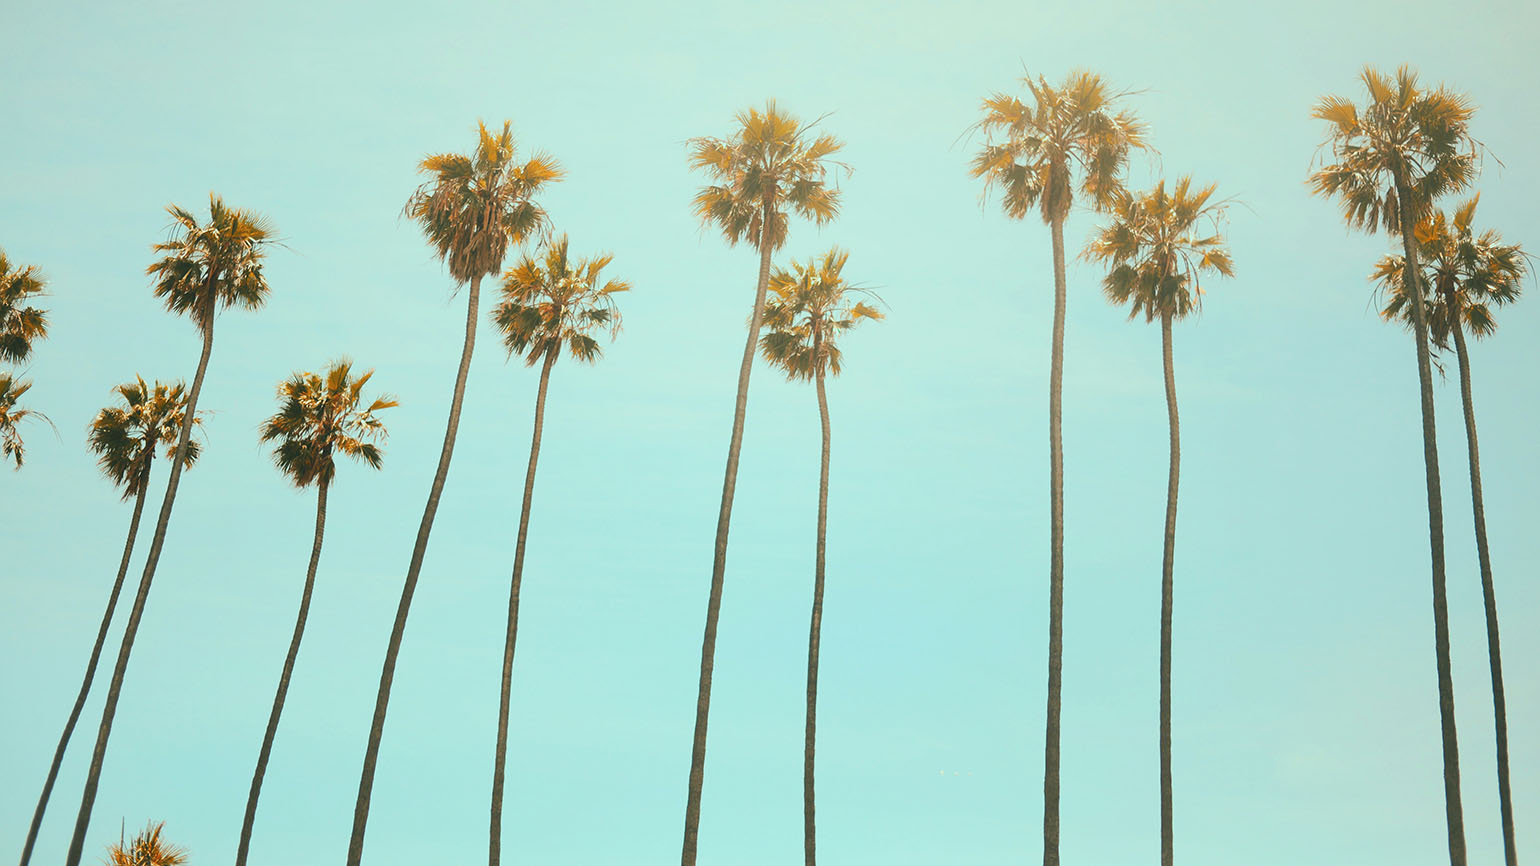 Palm trees on a California beach show us the meaning of growing together.